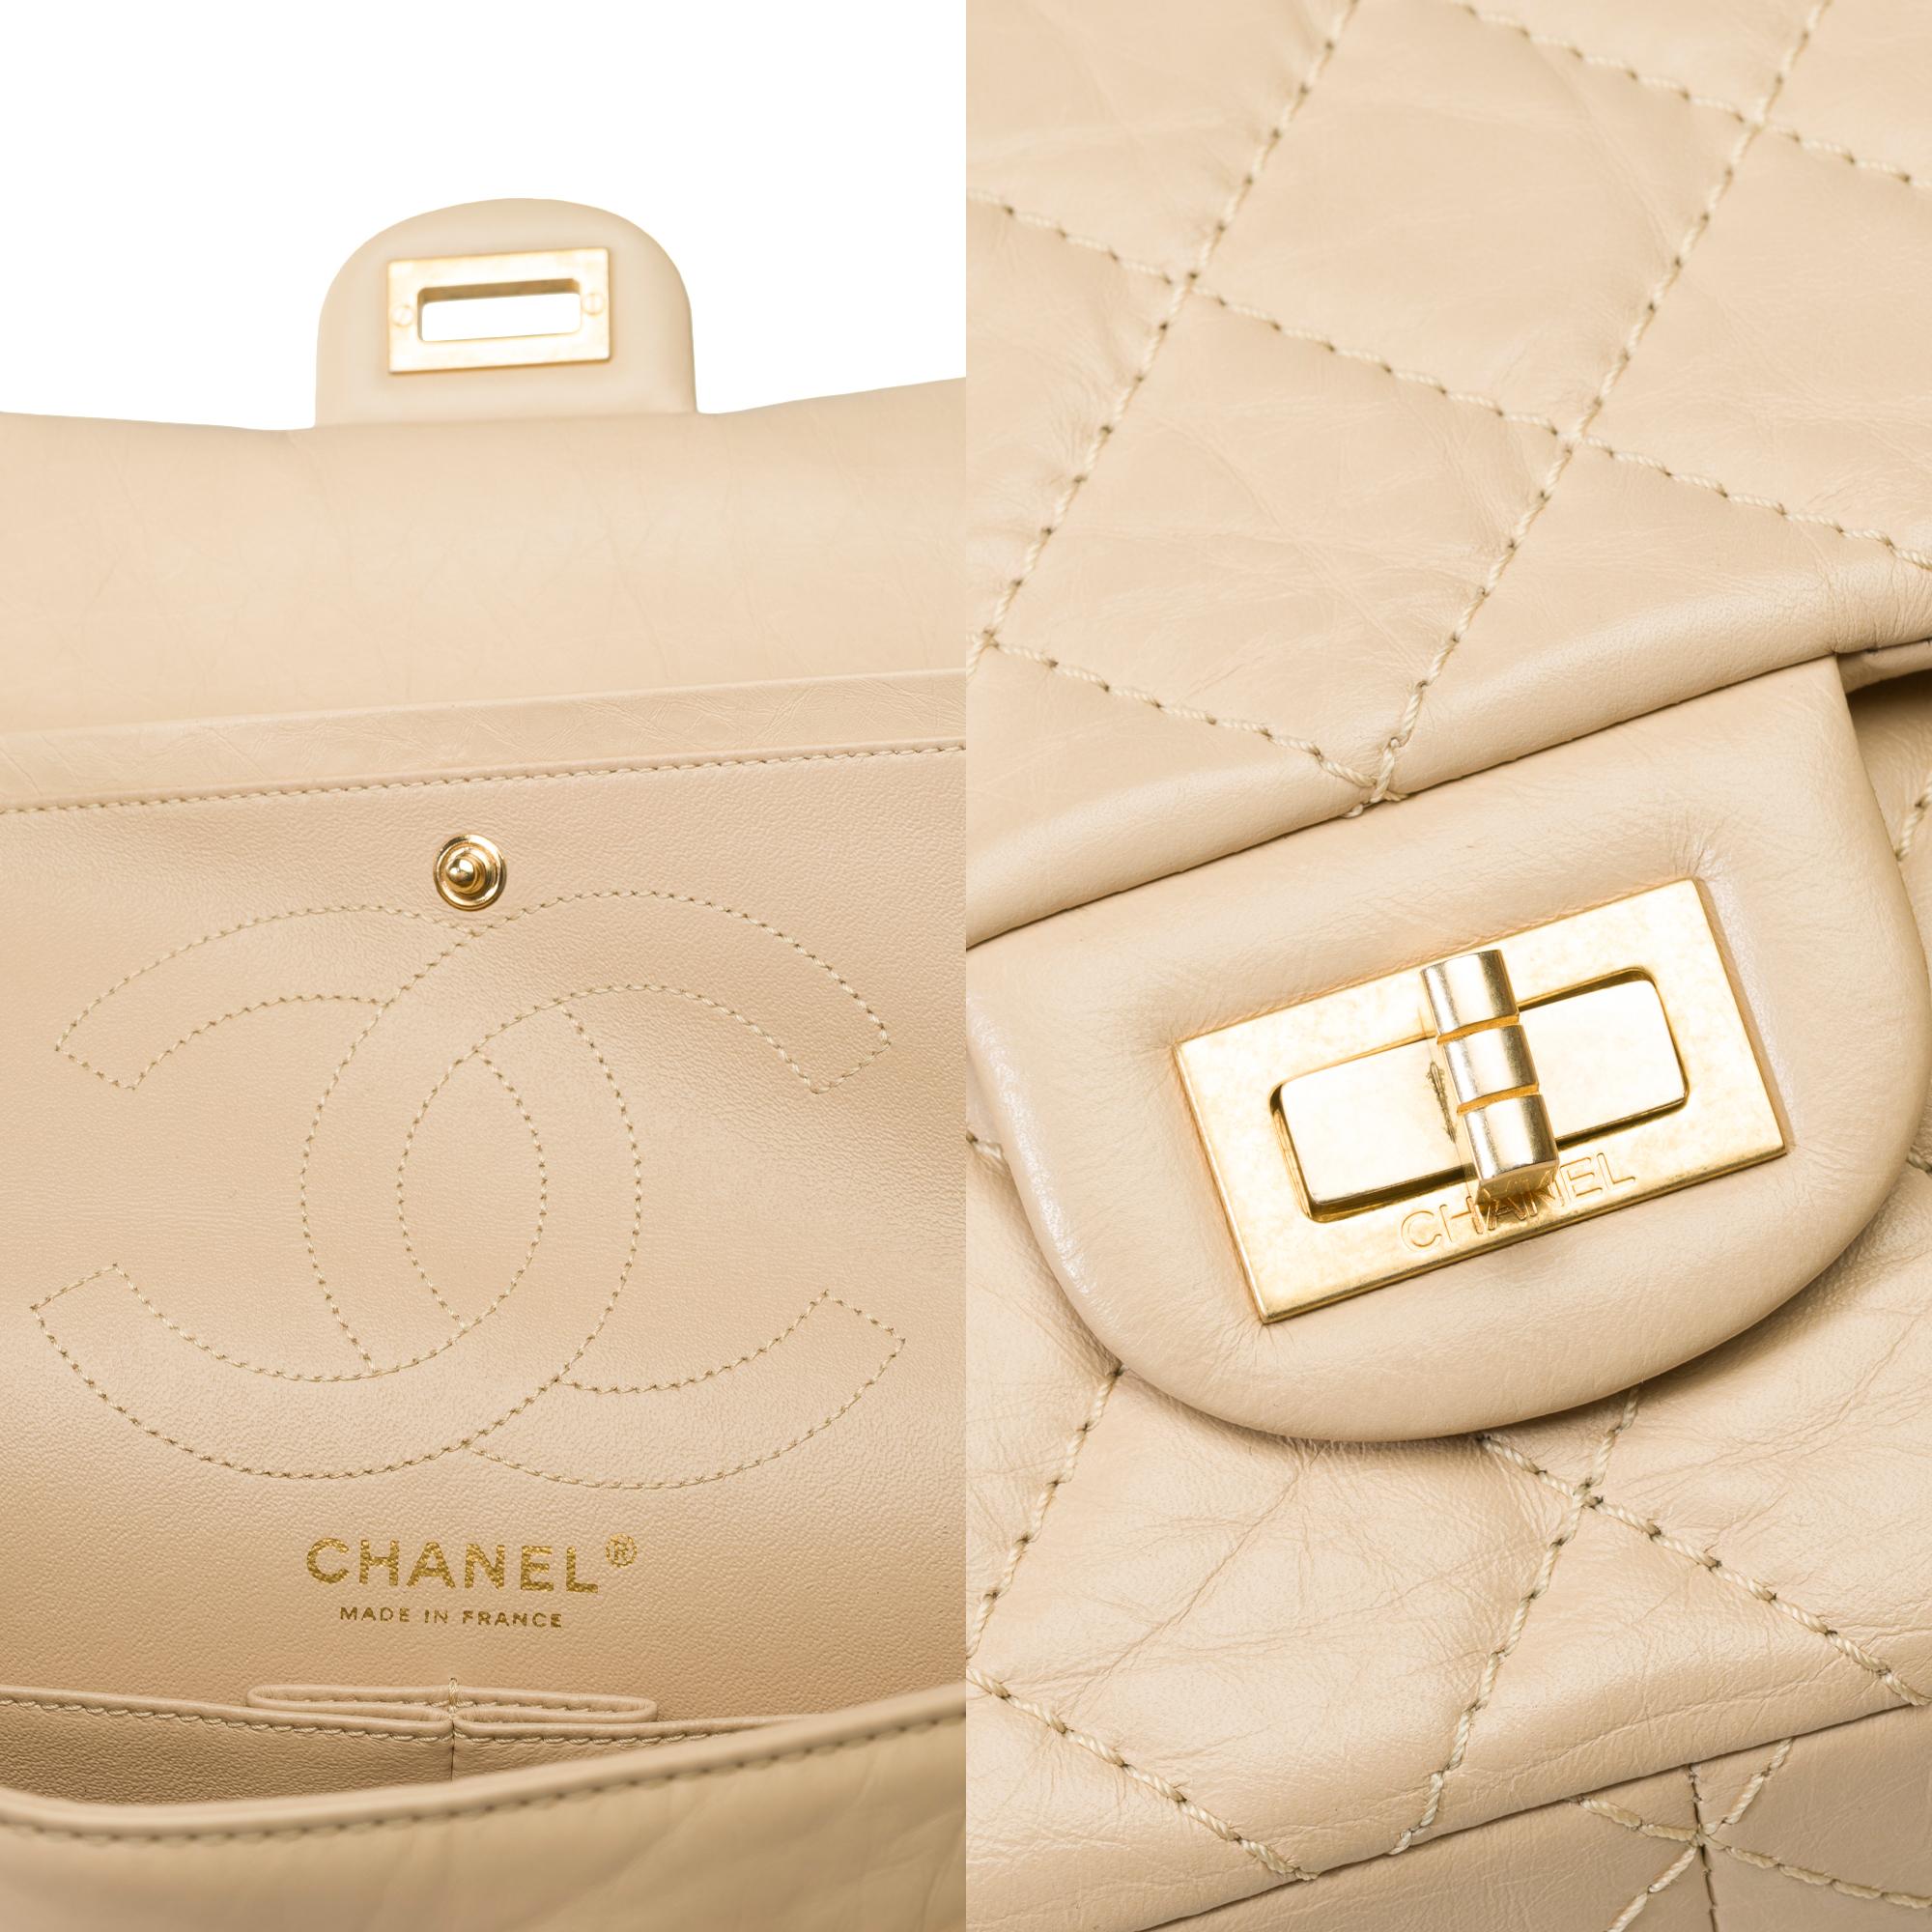 Iconic Chanel 2.55 double flap shoulder bag in quilted beige leather, GHW For Sale 4